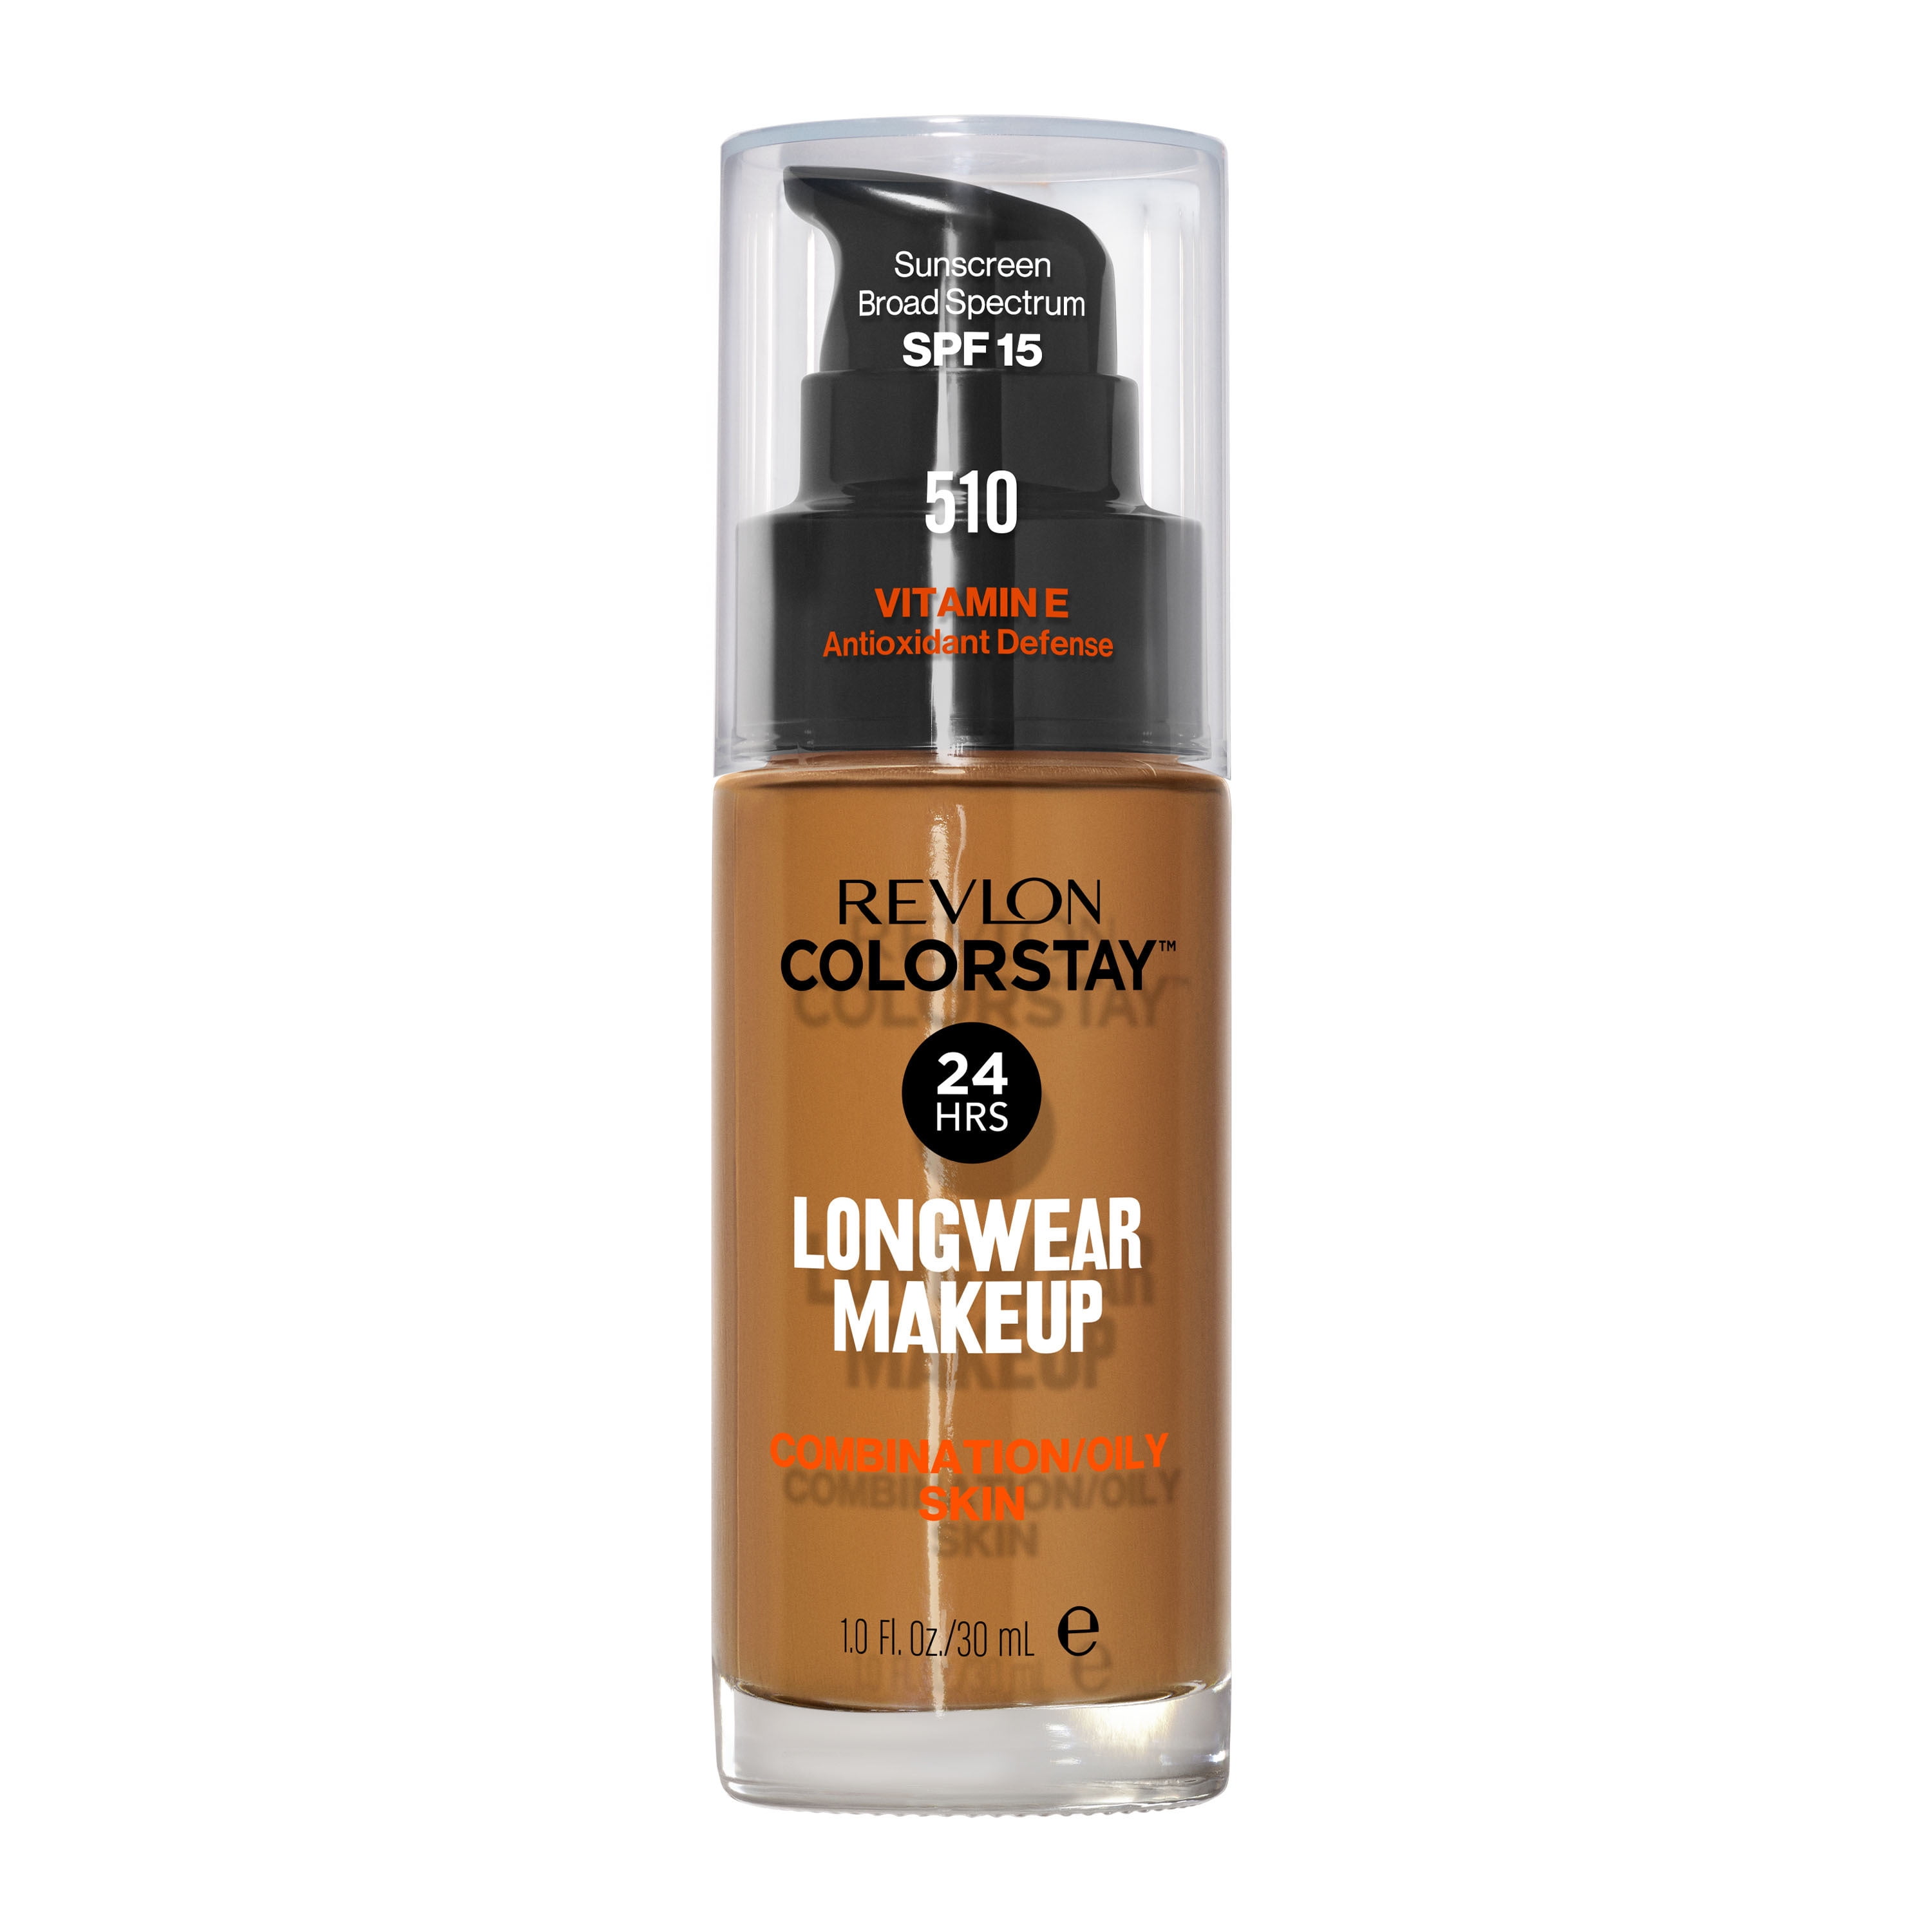 Revlon ColorStay Face Makeup for Combination & Oily Skin, SPF 15, Longwear Medium-Full Coverage with Matte Finish, 510 Pecan